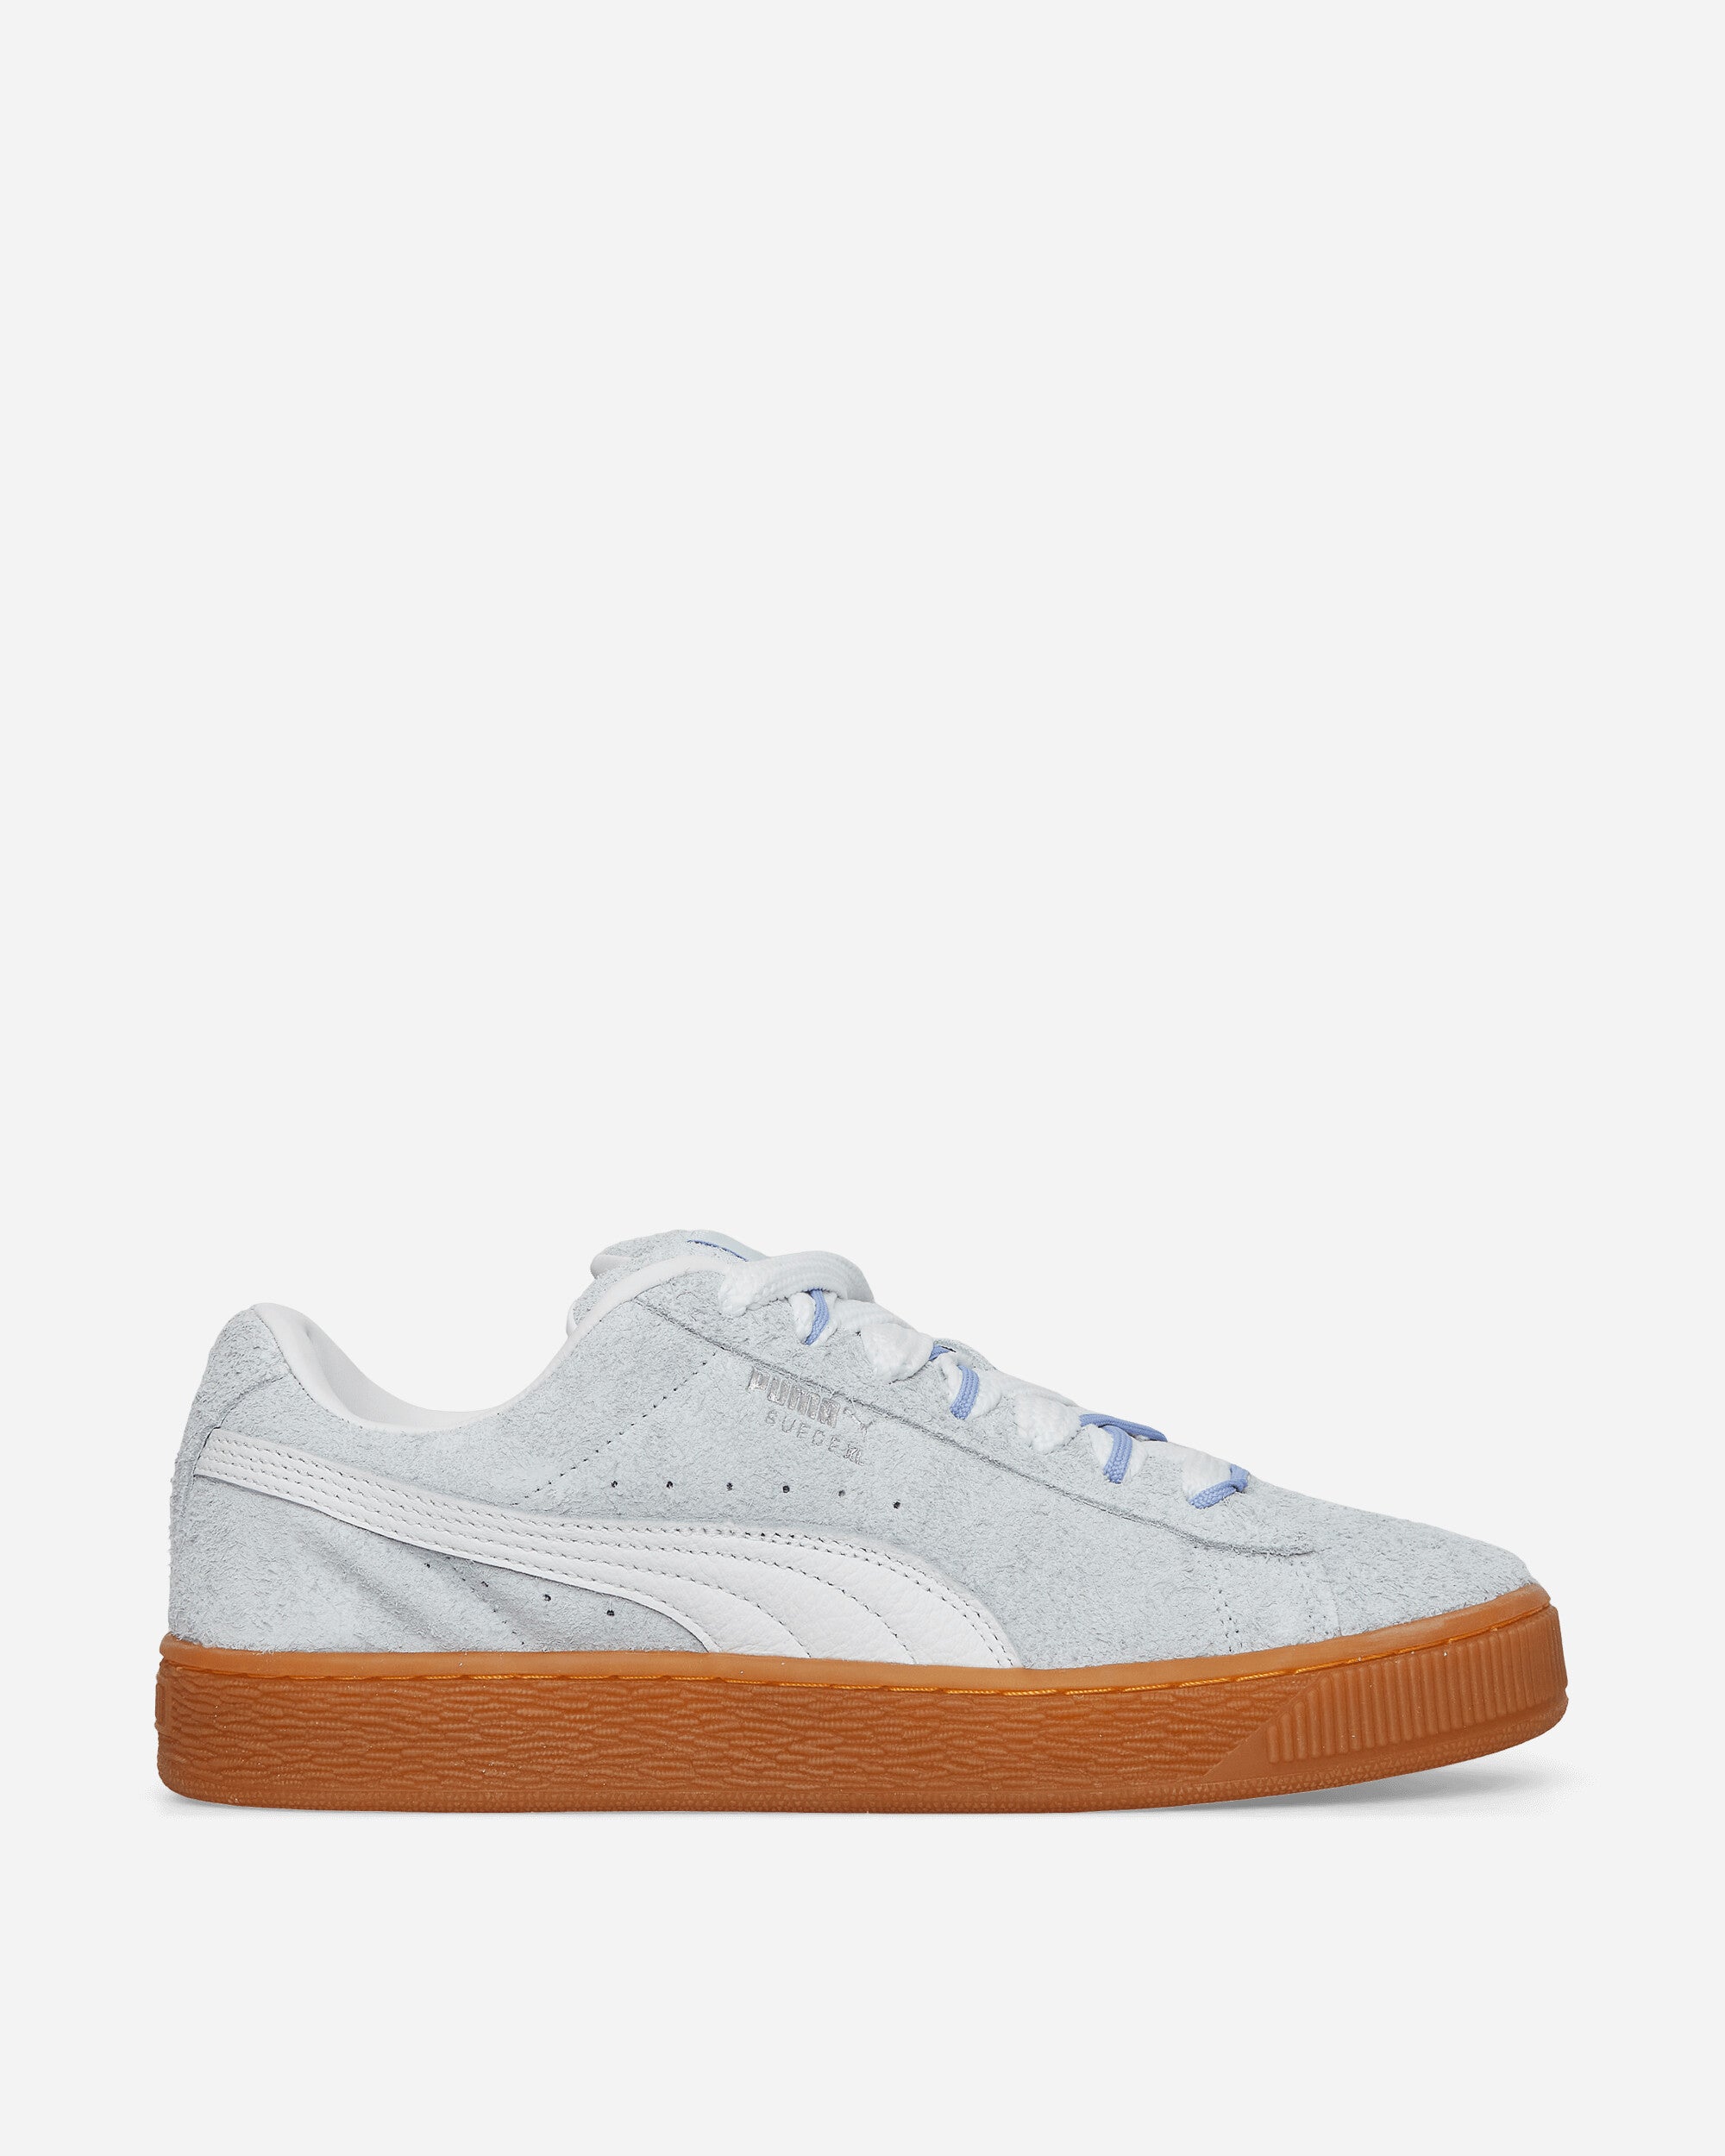 Puma Wmns Suede Xl Thick N Thin Light Blue/White Sneakers Low 398325-01